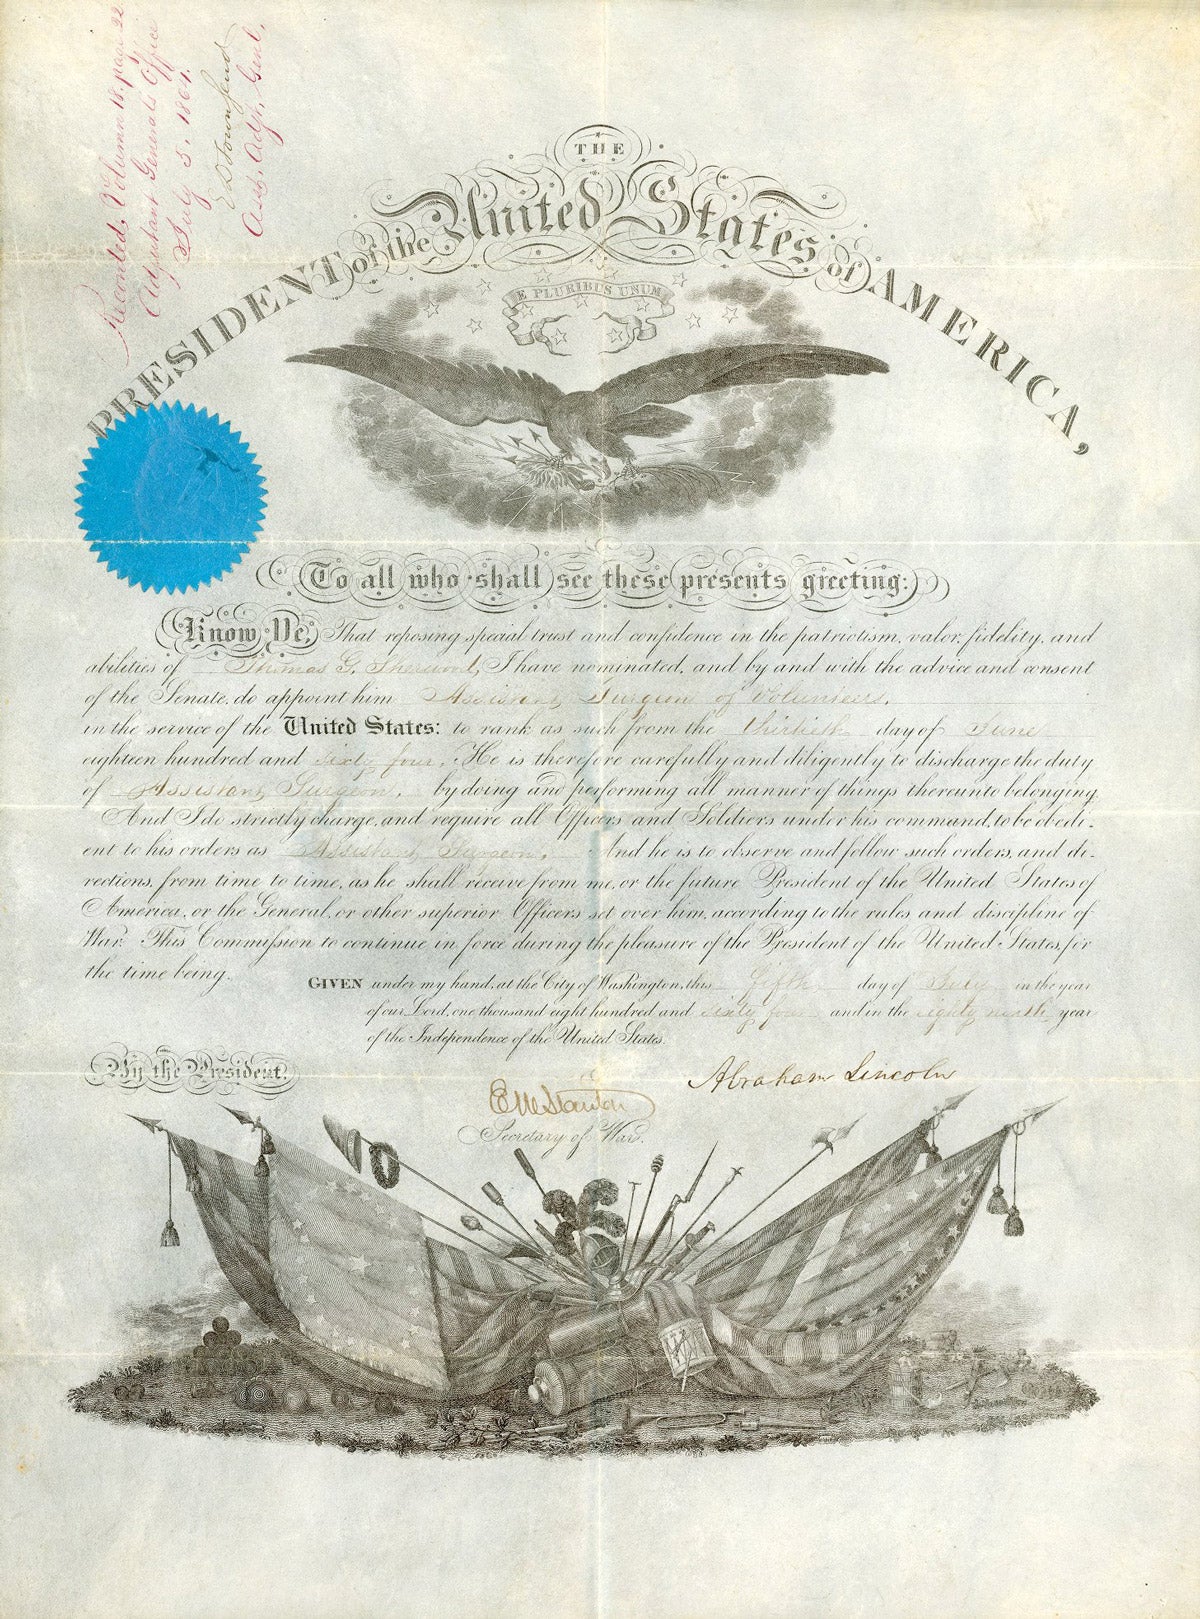 Certificate of promotion in Union Army the for Thomas Humphries Sherwood, 1864